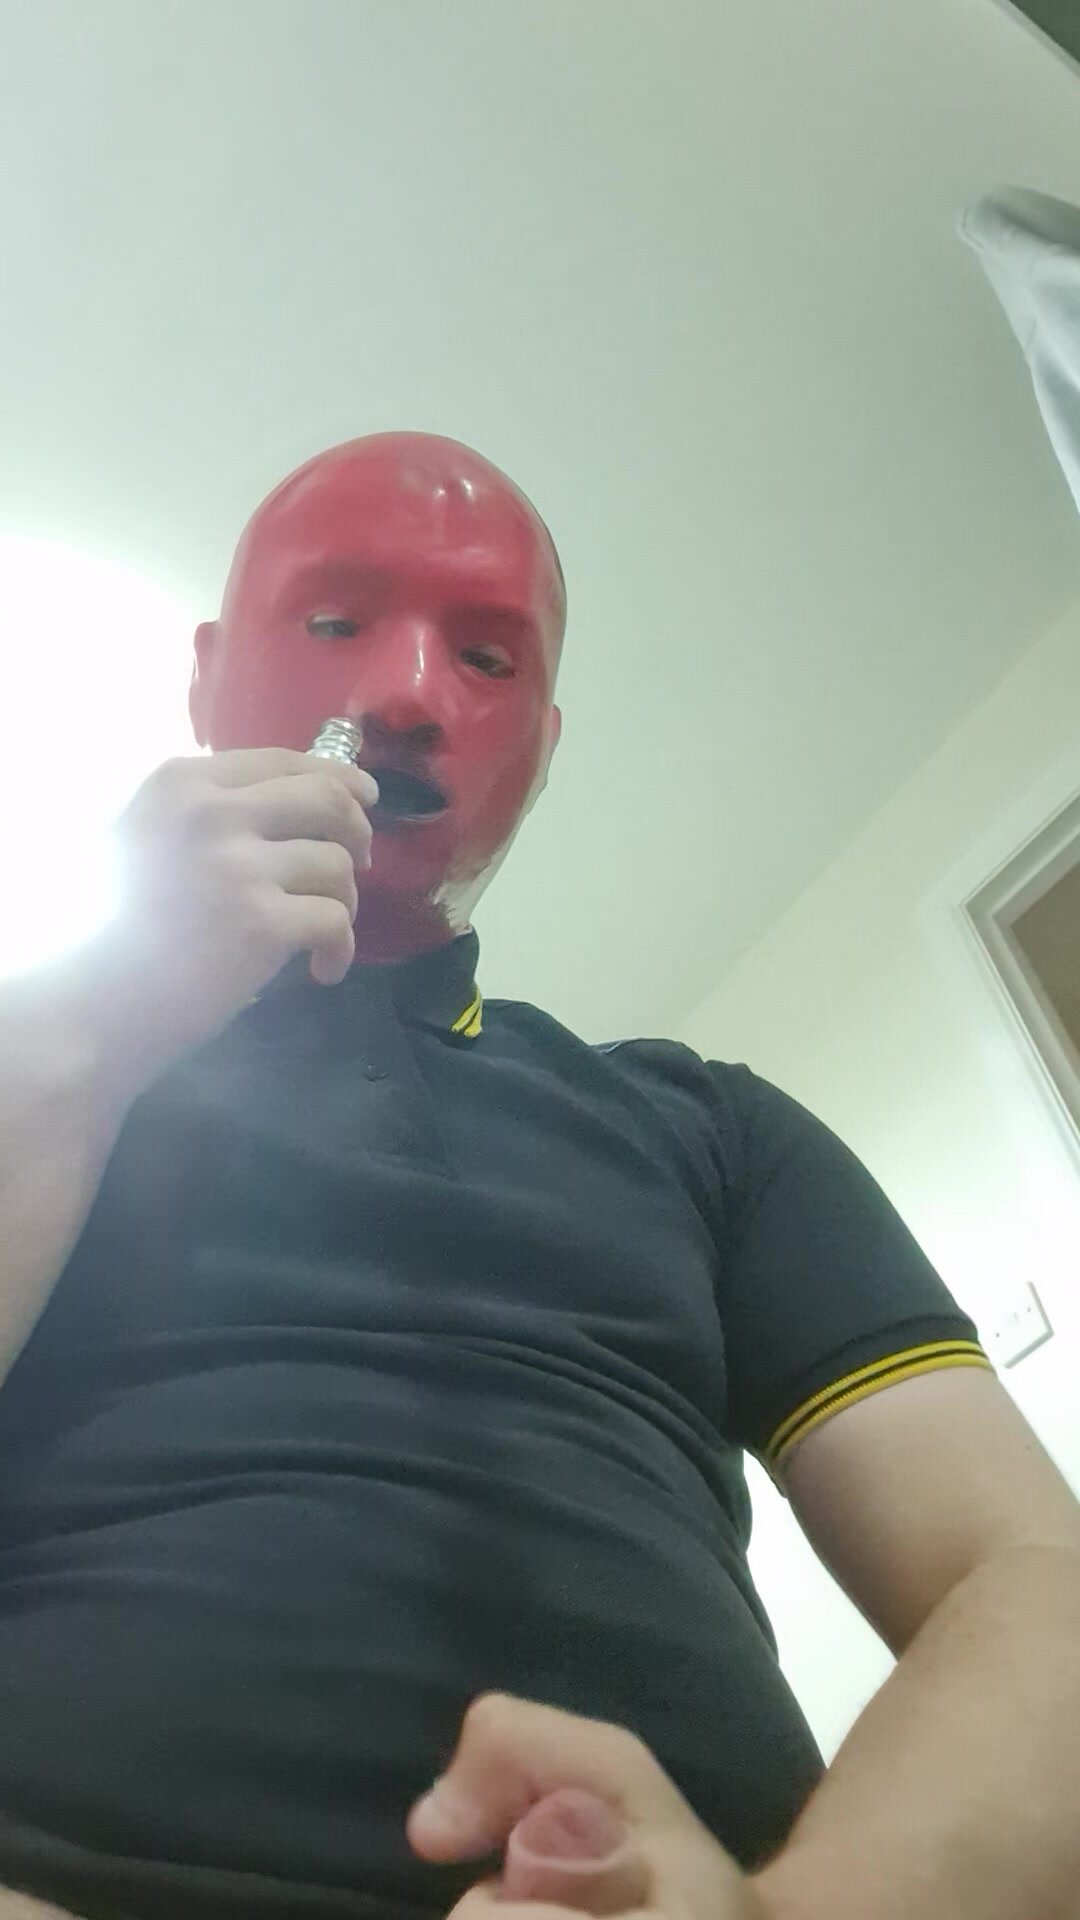 Rubber pig sniffs poppers